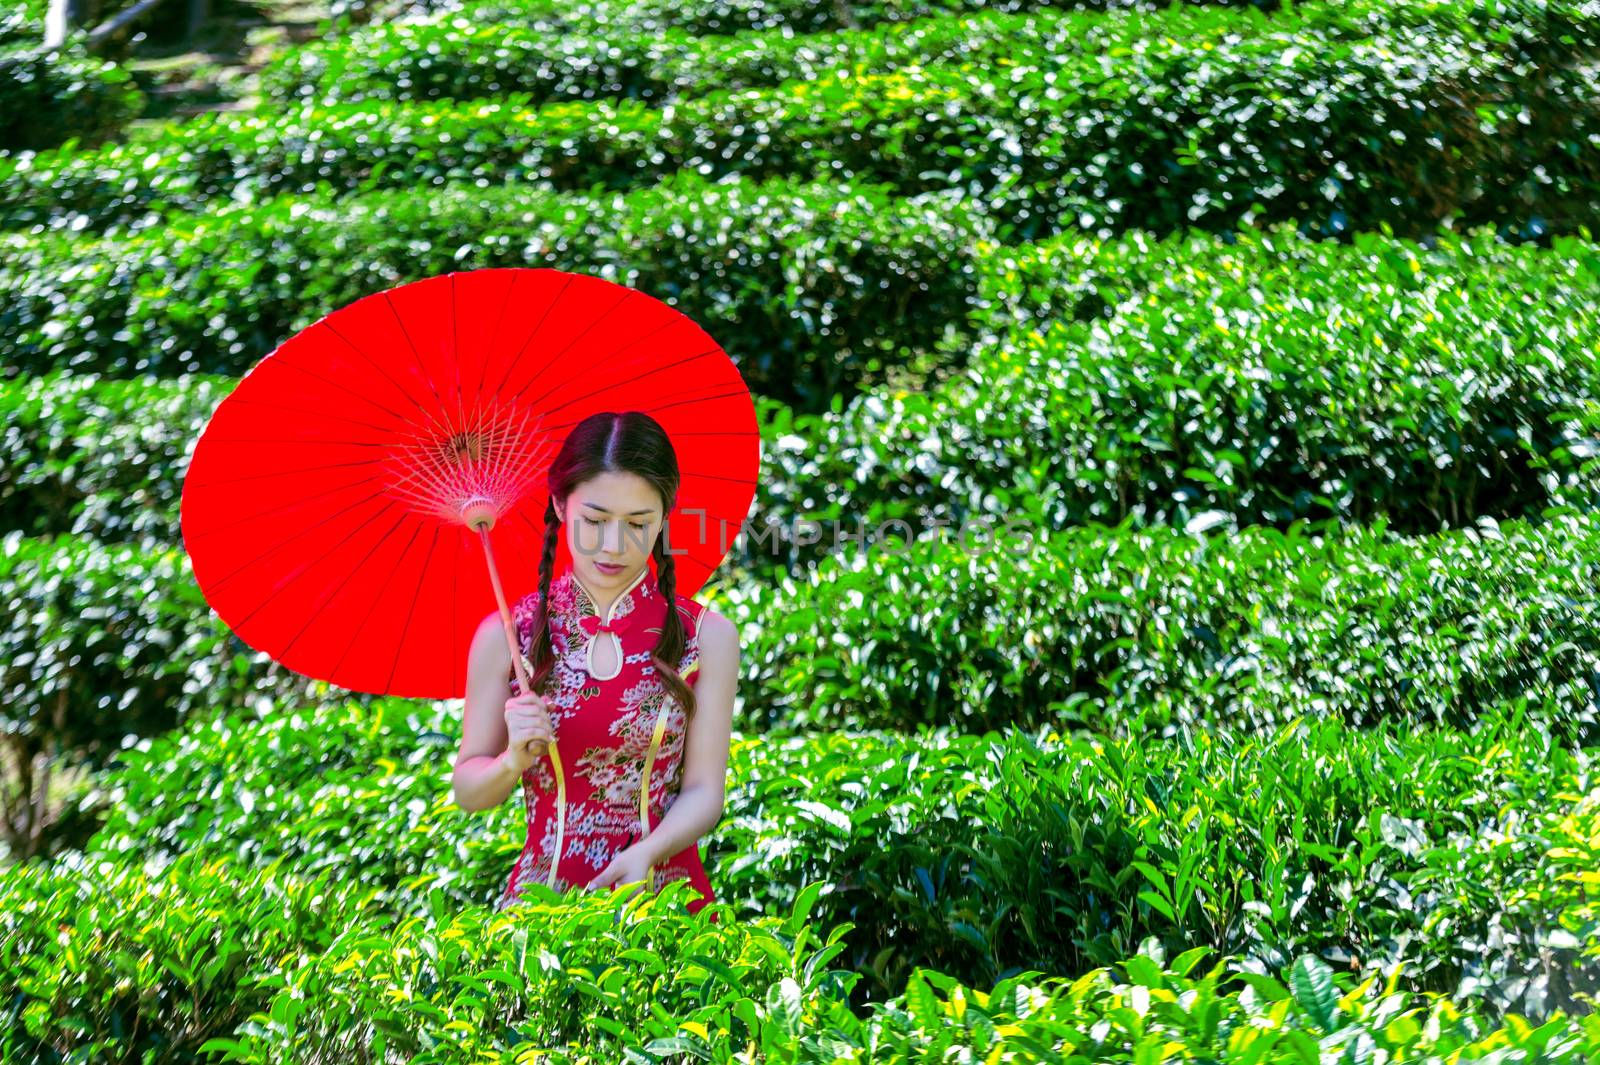 Asian woman wearing traditional Chinese dress and red umbrella in green tea field.